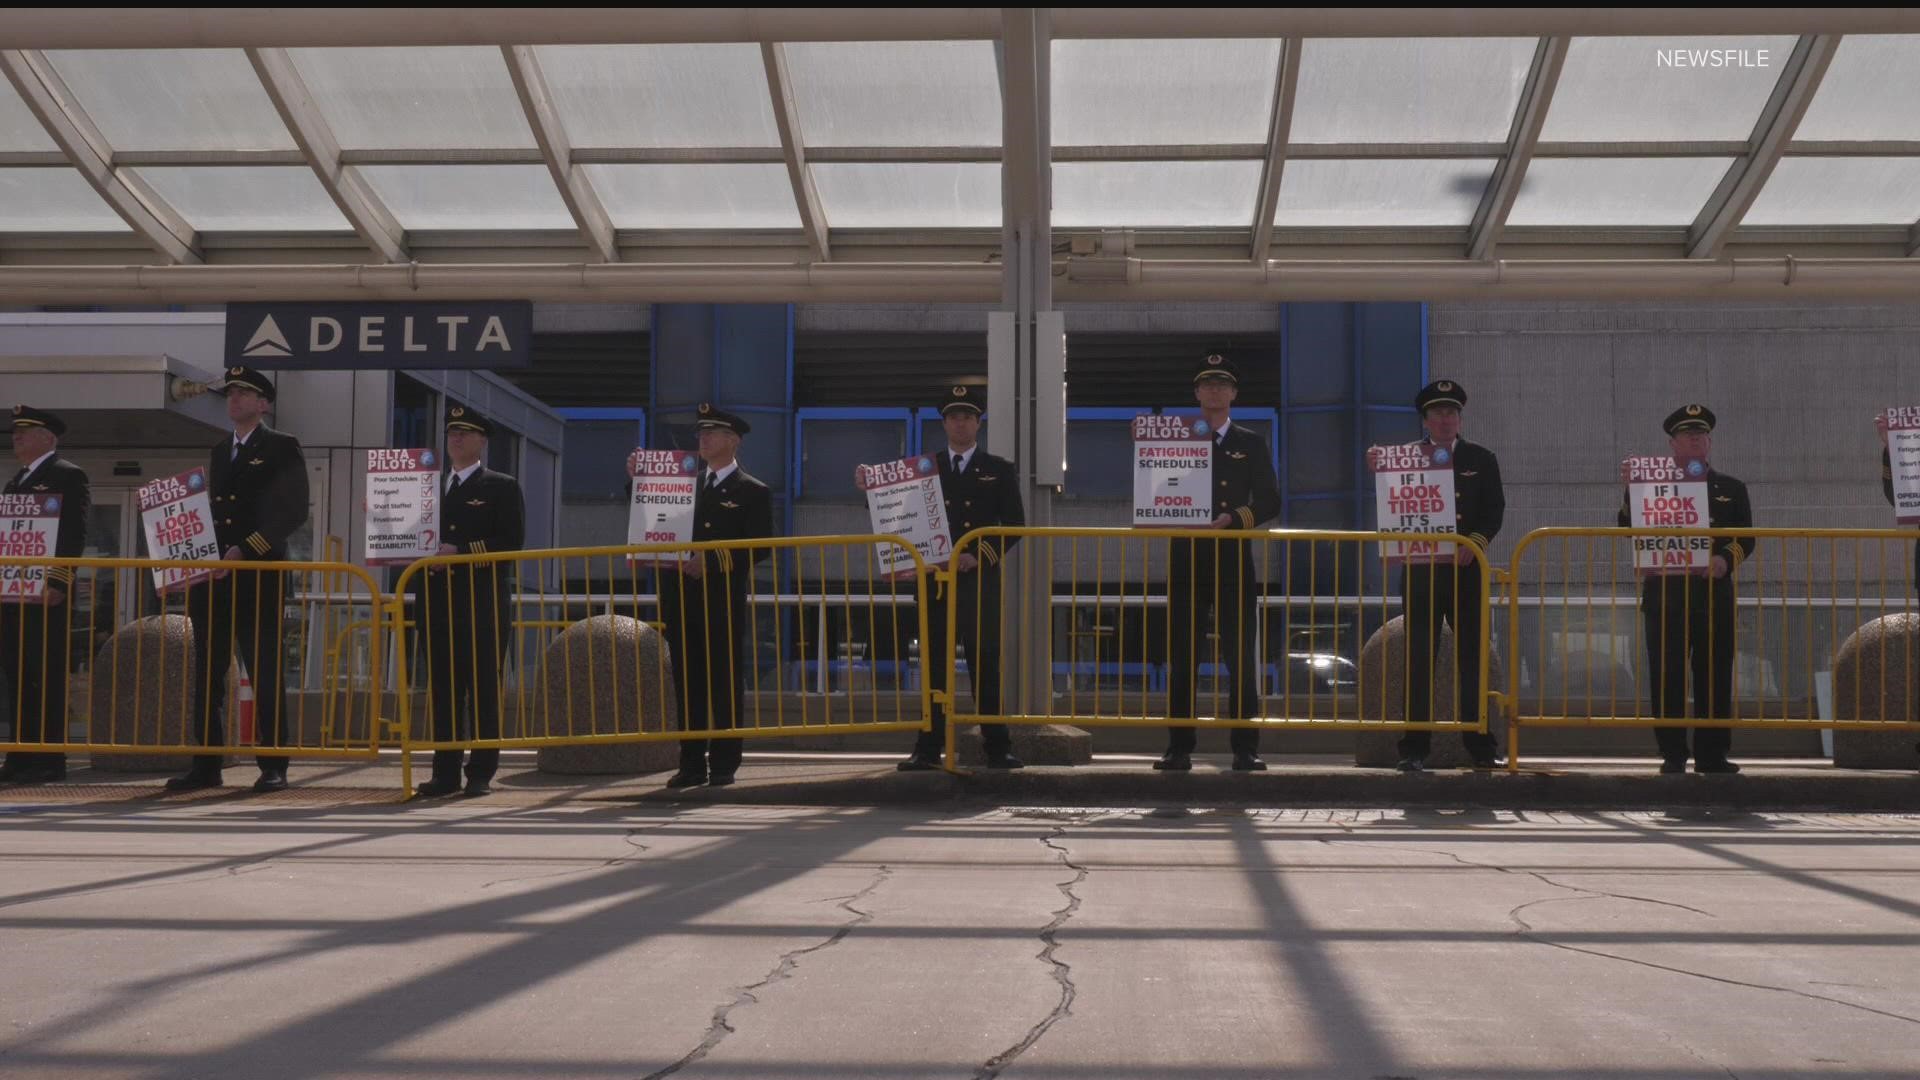 The picket will take place at seven airports across the country.